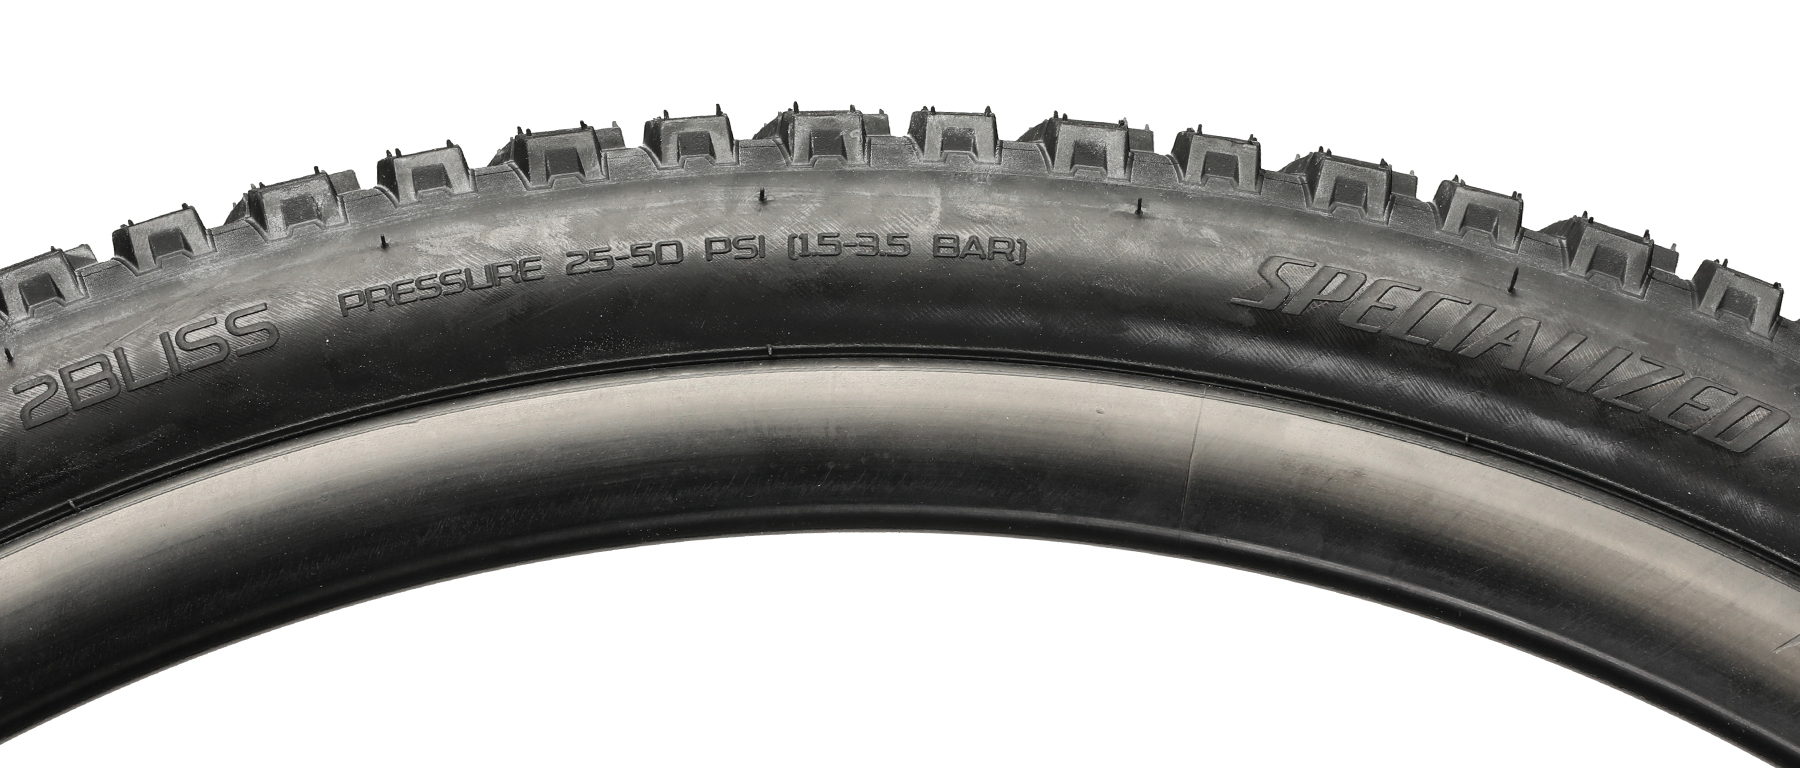 Specialized Purgatory CONTROL 2Bliss Ready Tire